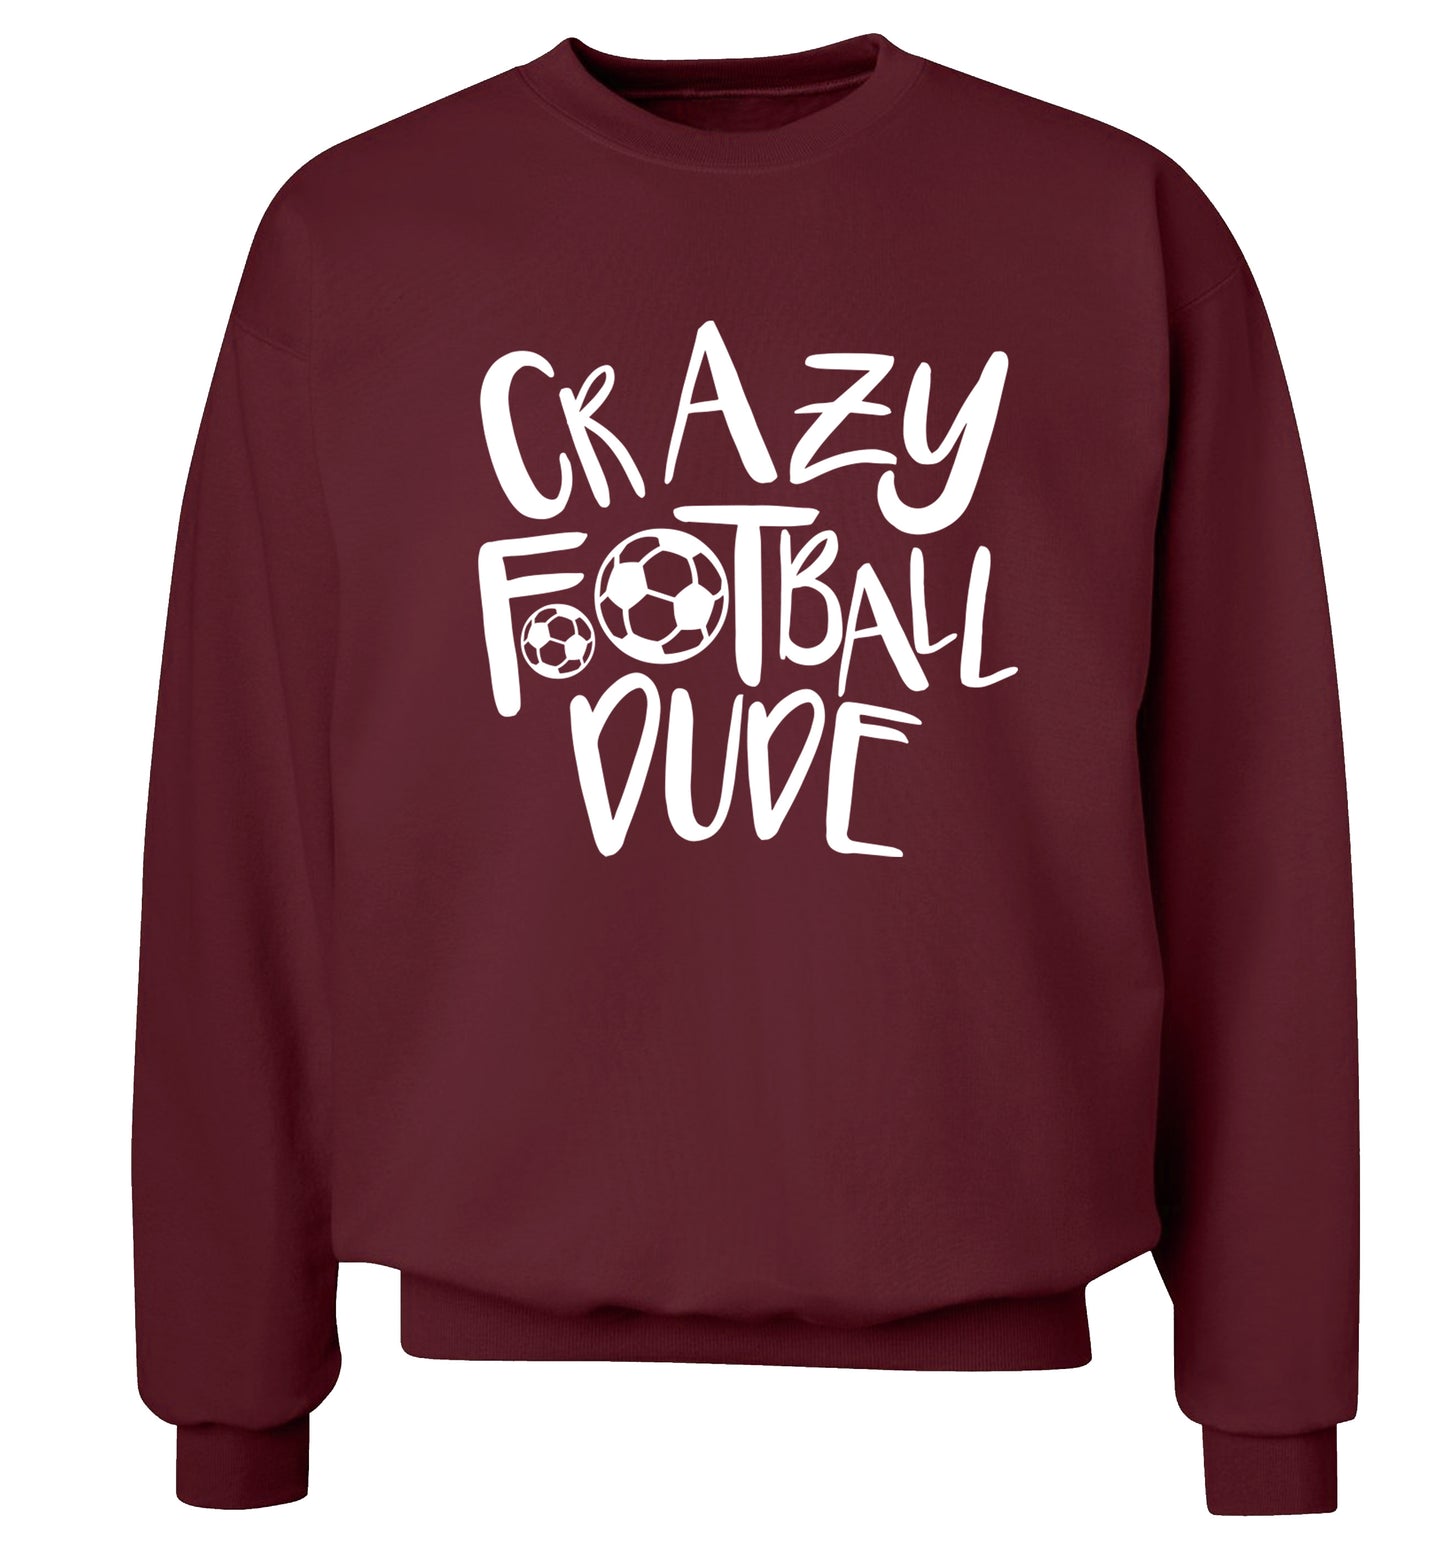 Crazy football dude Adult's unisexmaroon Sweater 2XL